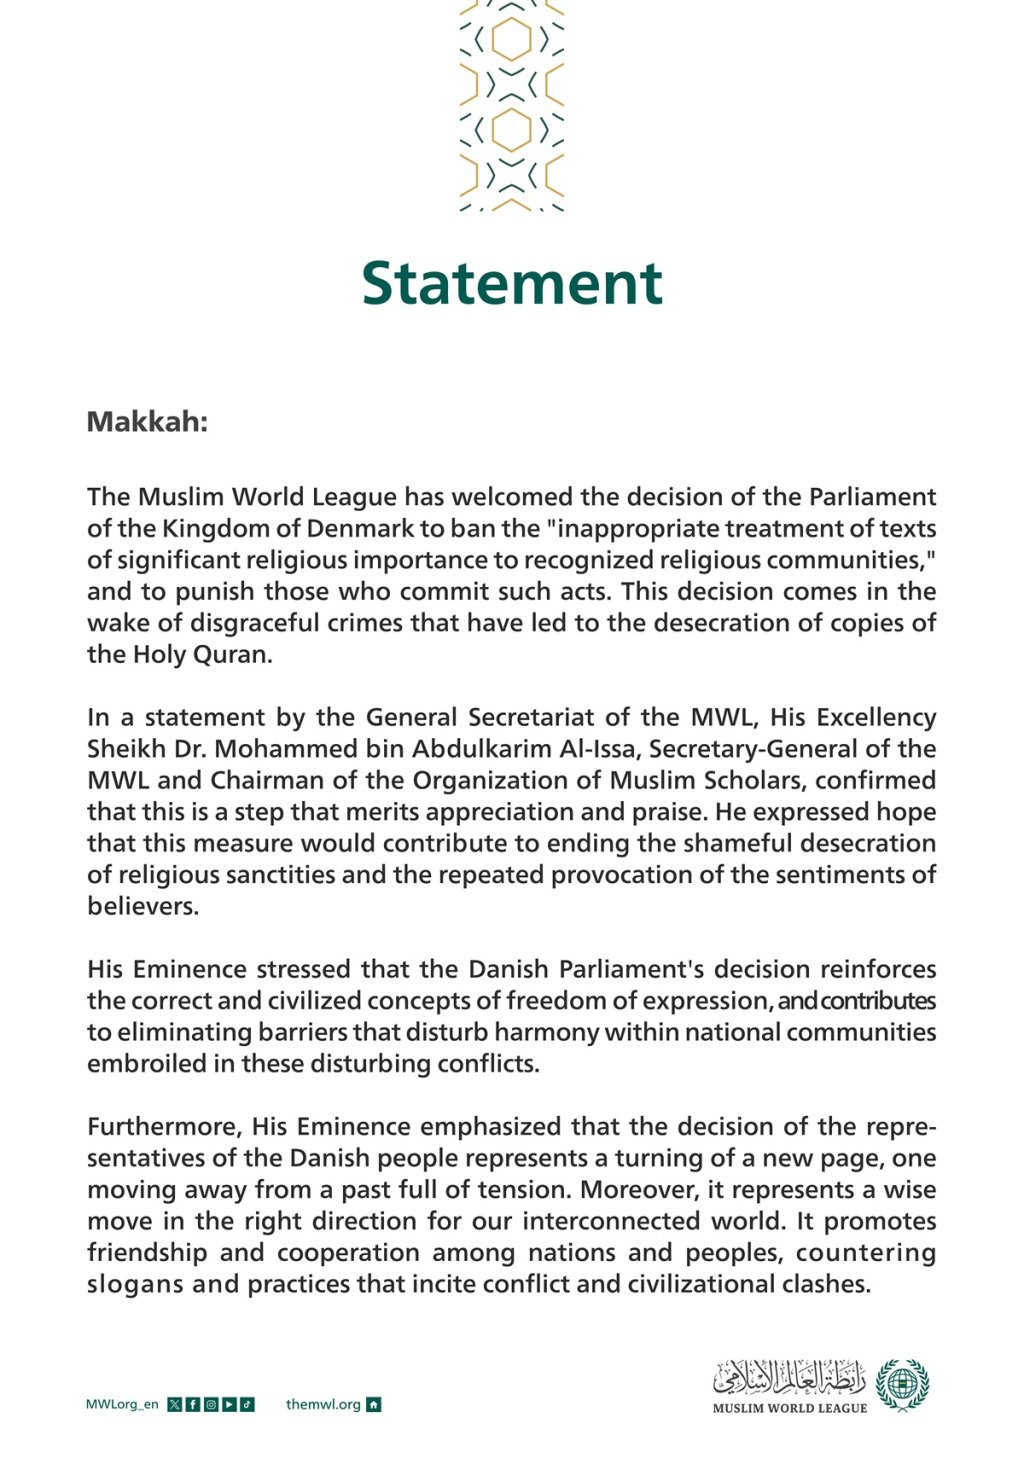 The Muslim World League has welcomed the decision of the Parliament of the Kingdom of Denmark to ban the "inappropriate treatment of texts of significant religious